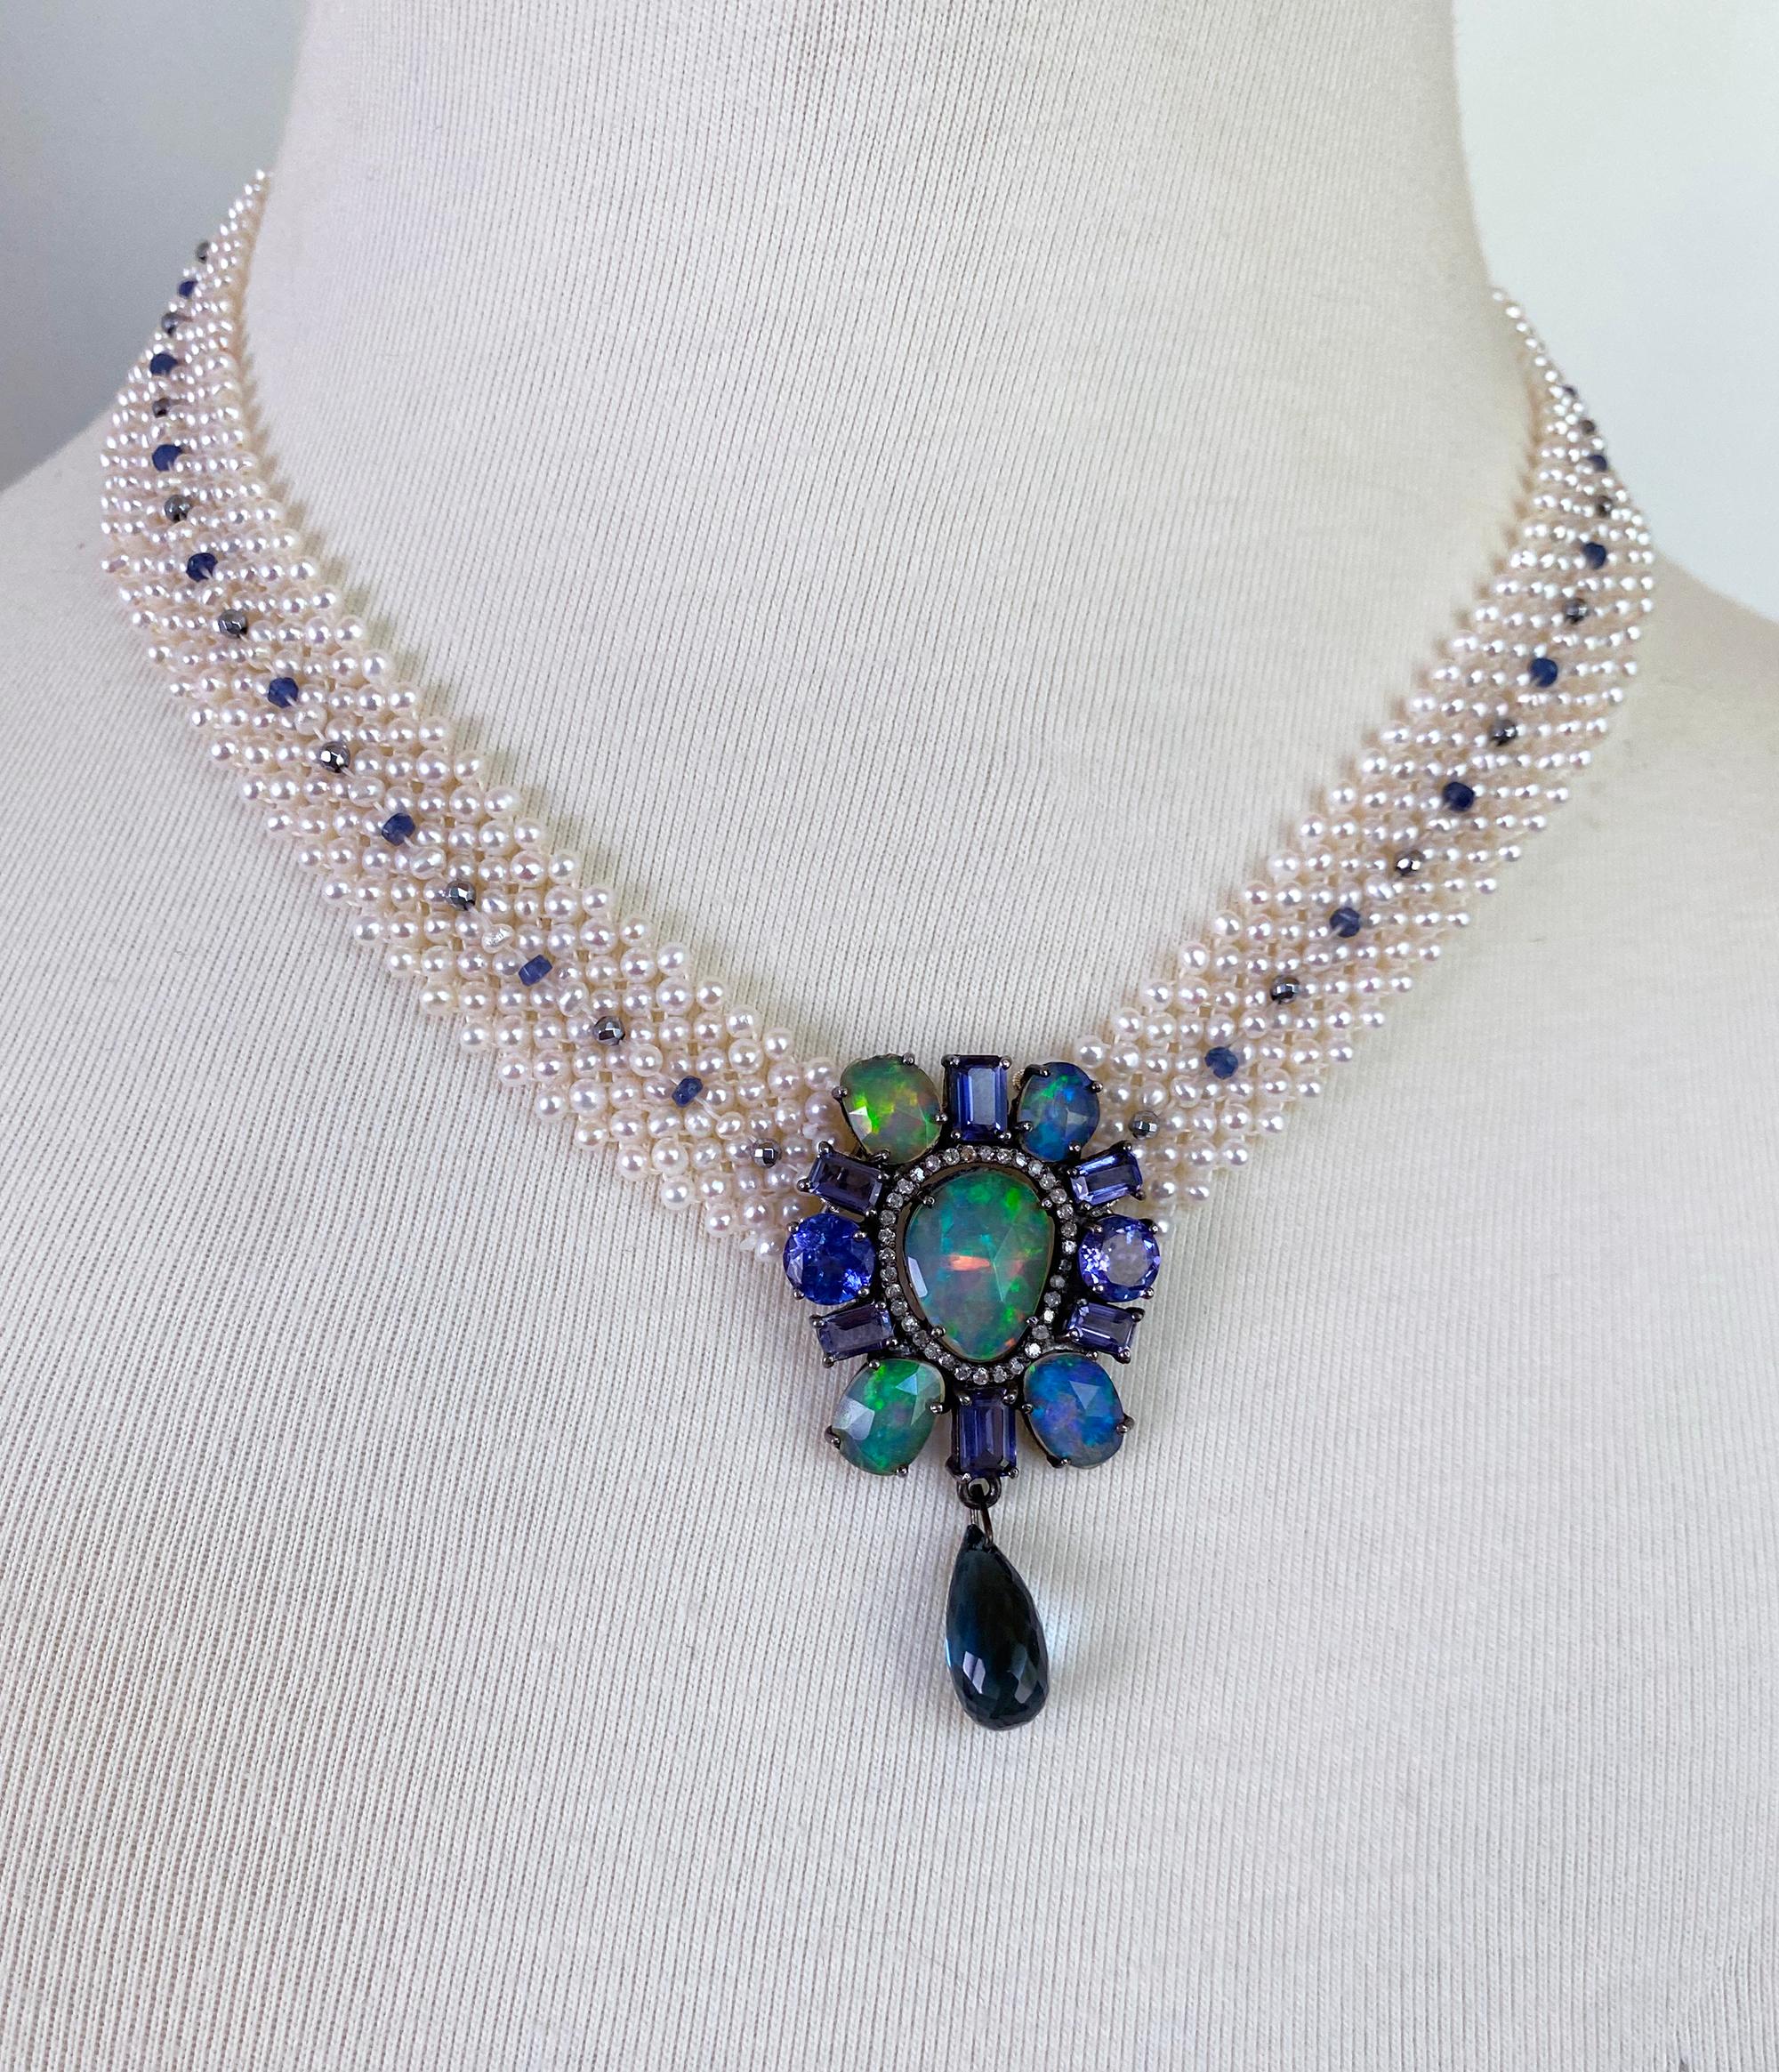 Beautiful One of A Kind piece by Marina J. This Necklace is made of all cultured Seed Pearls intricately woven together into an elegant Lace like design. Faceted Blue Sapphires and Hematites adorn the center of the Pearl band, perfectly